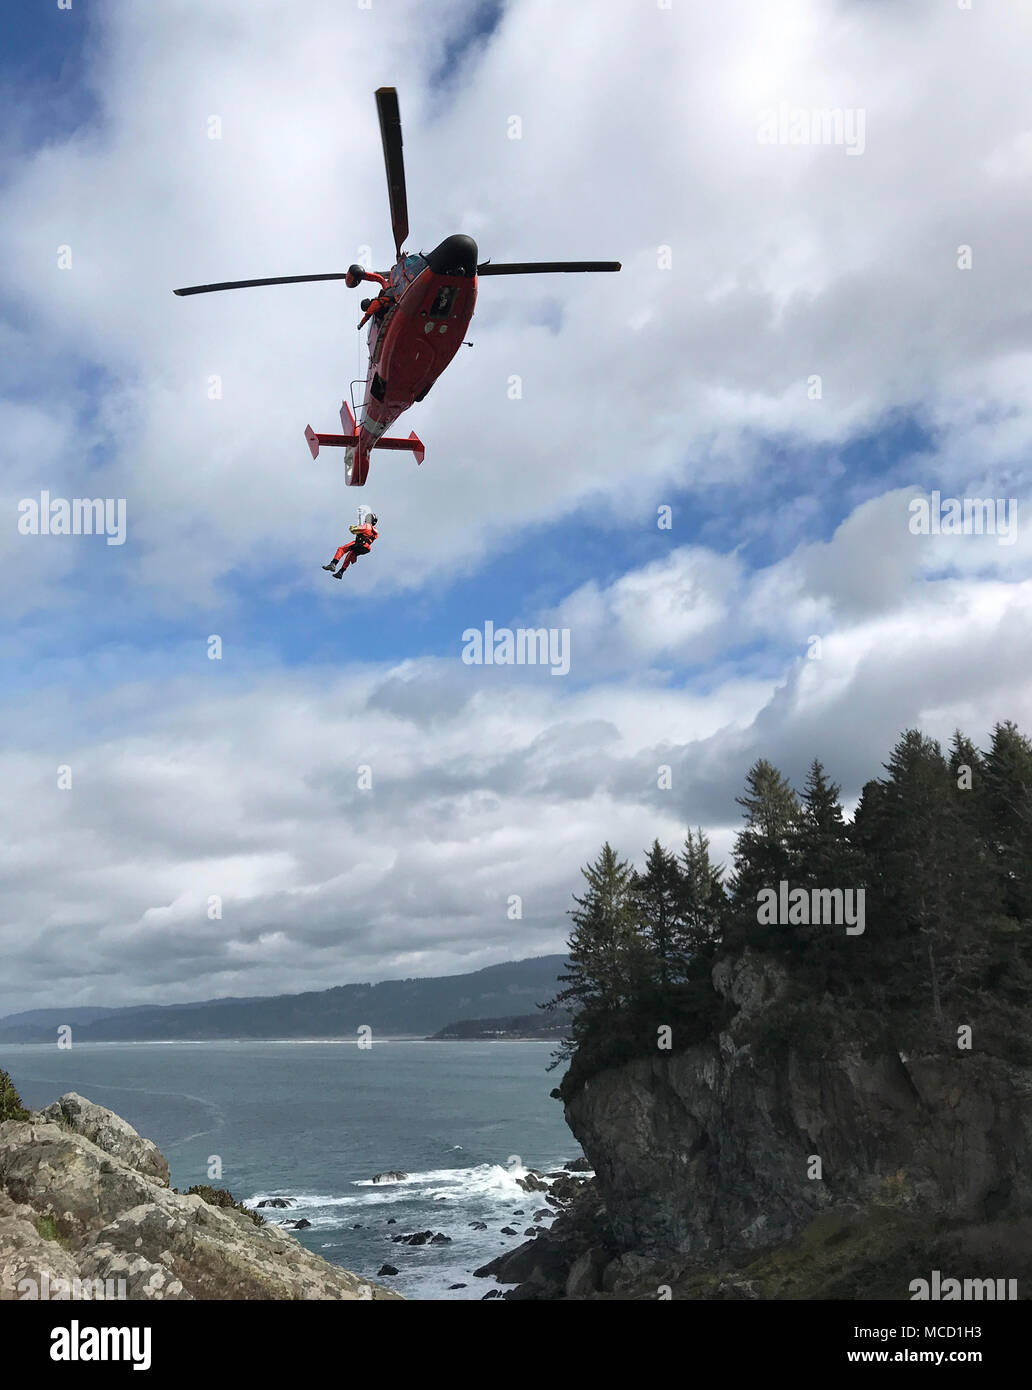 A Coast Guard Sector Humboldt Bay MH-65 Dolphin helicopter crew conducts cliff-rescue training at Patrick's Point State Park, California, Feb. 14, 2018. The helicopter crews assigned to Sector Humboldt Bay cover Humboldt, Mendocino and Del Norte counties. (U.S. Coast Guard photo by Lt. j.g. Audra Forteza/Released) Stock Photo